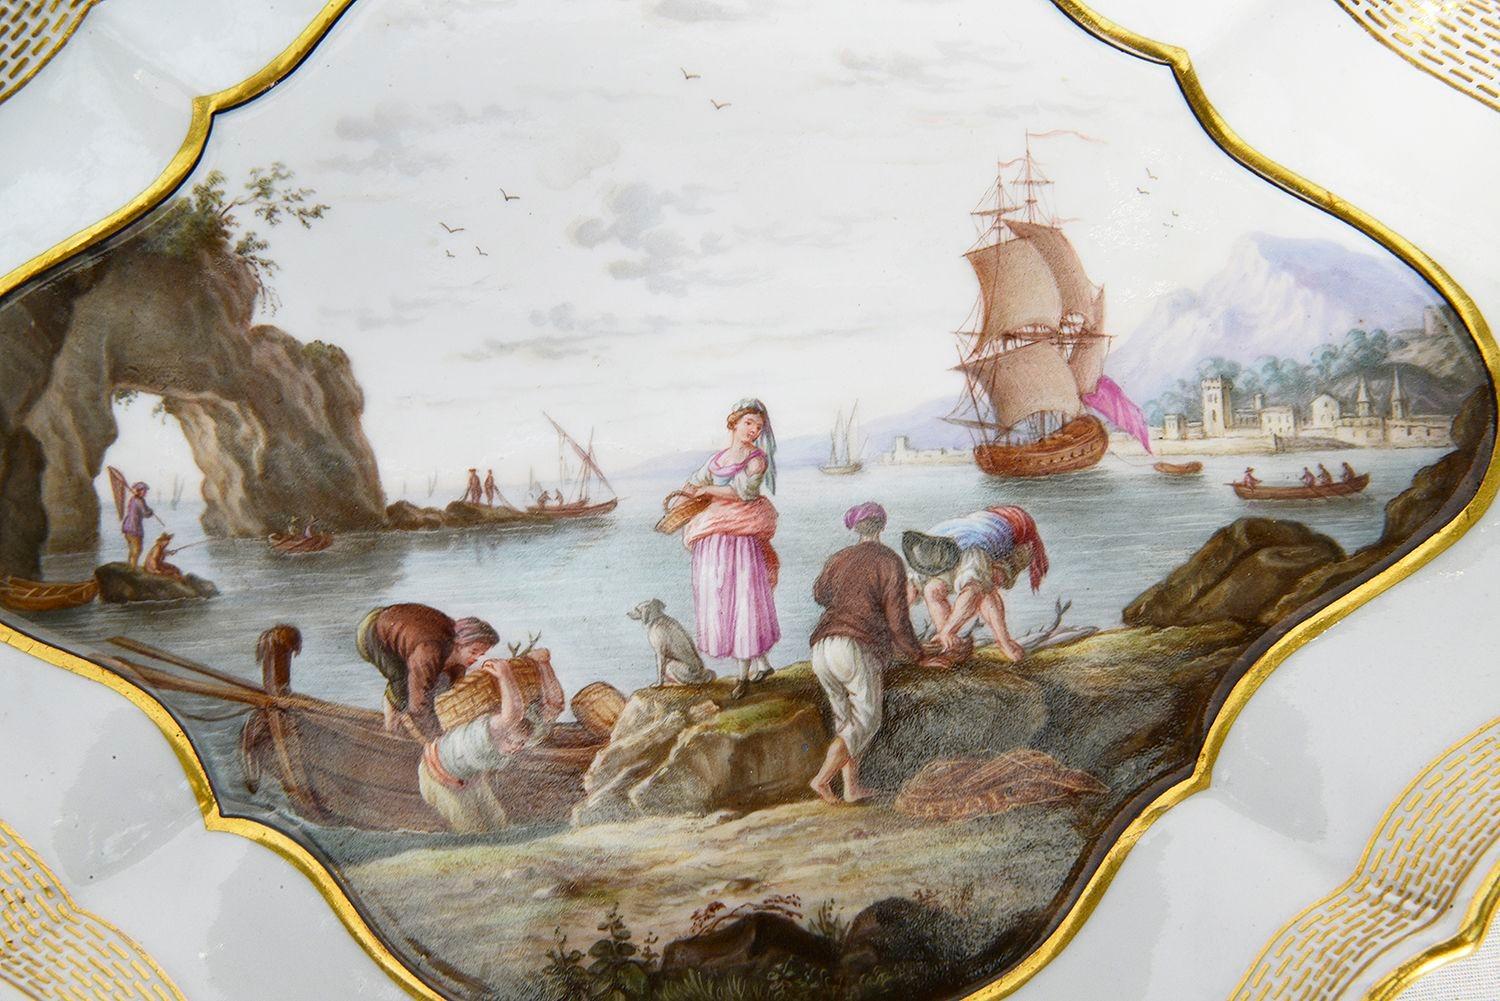 19th Century Meissen porcelain tray, depicting fisherman and women, with a galleon in the background.

Batch 75 G9855/22 DNKZZ